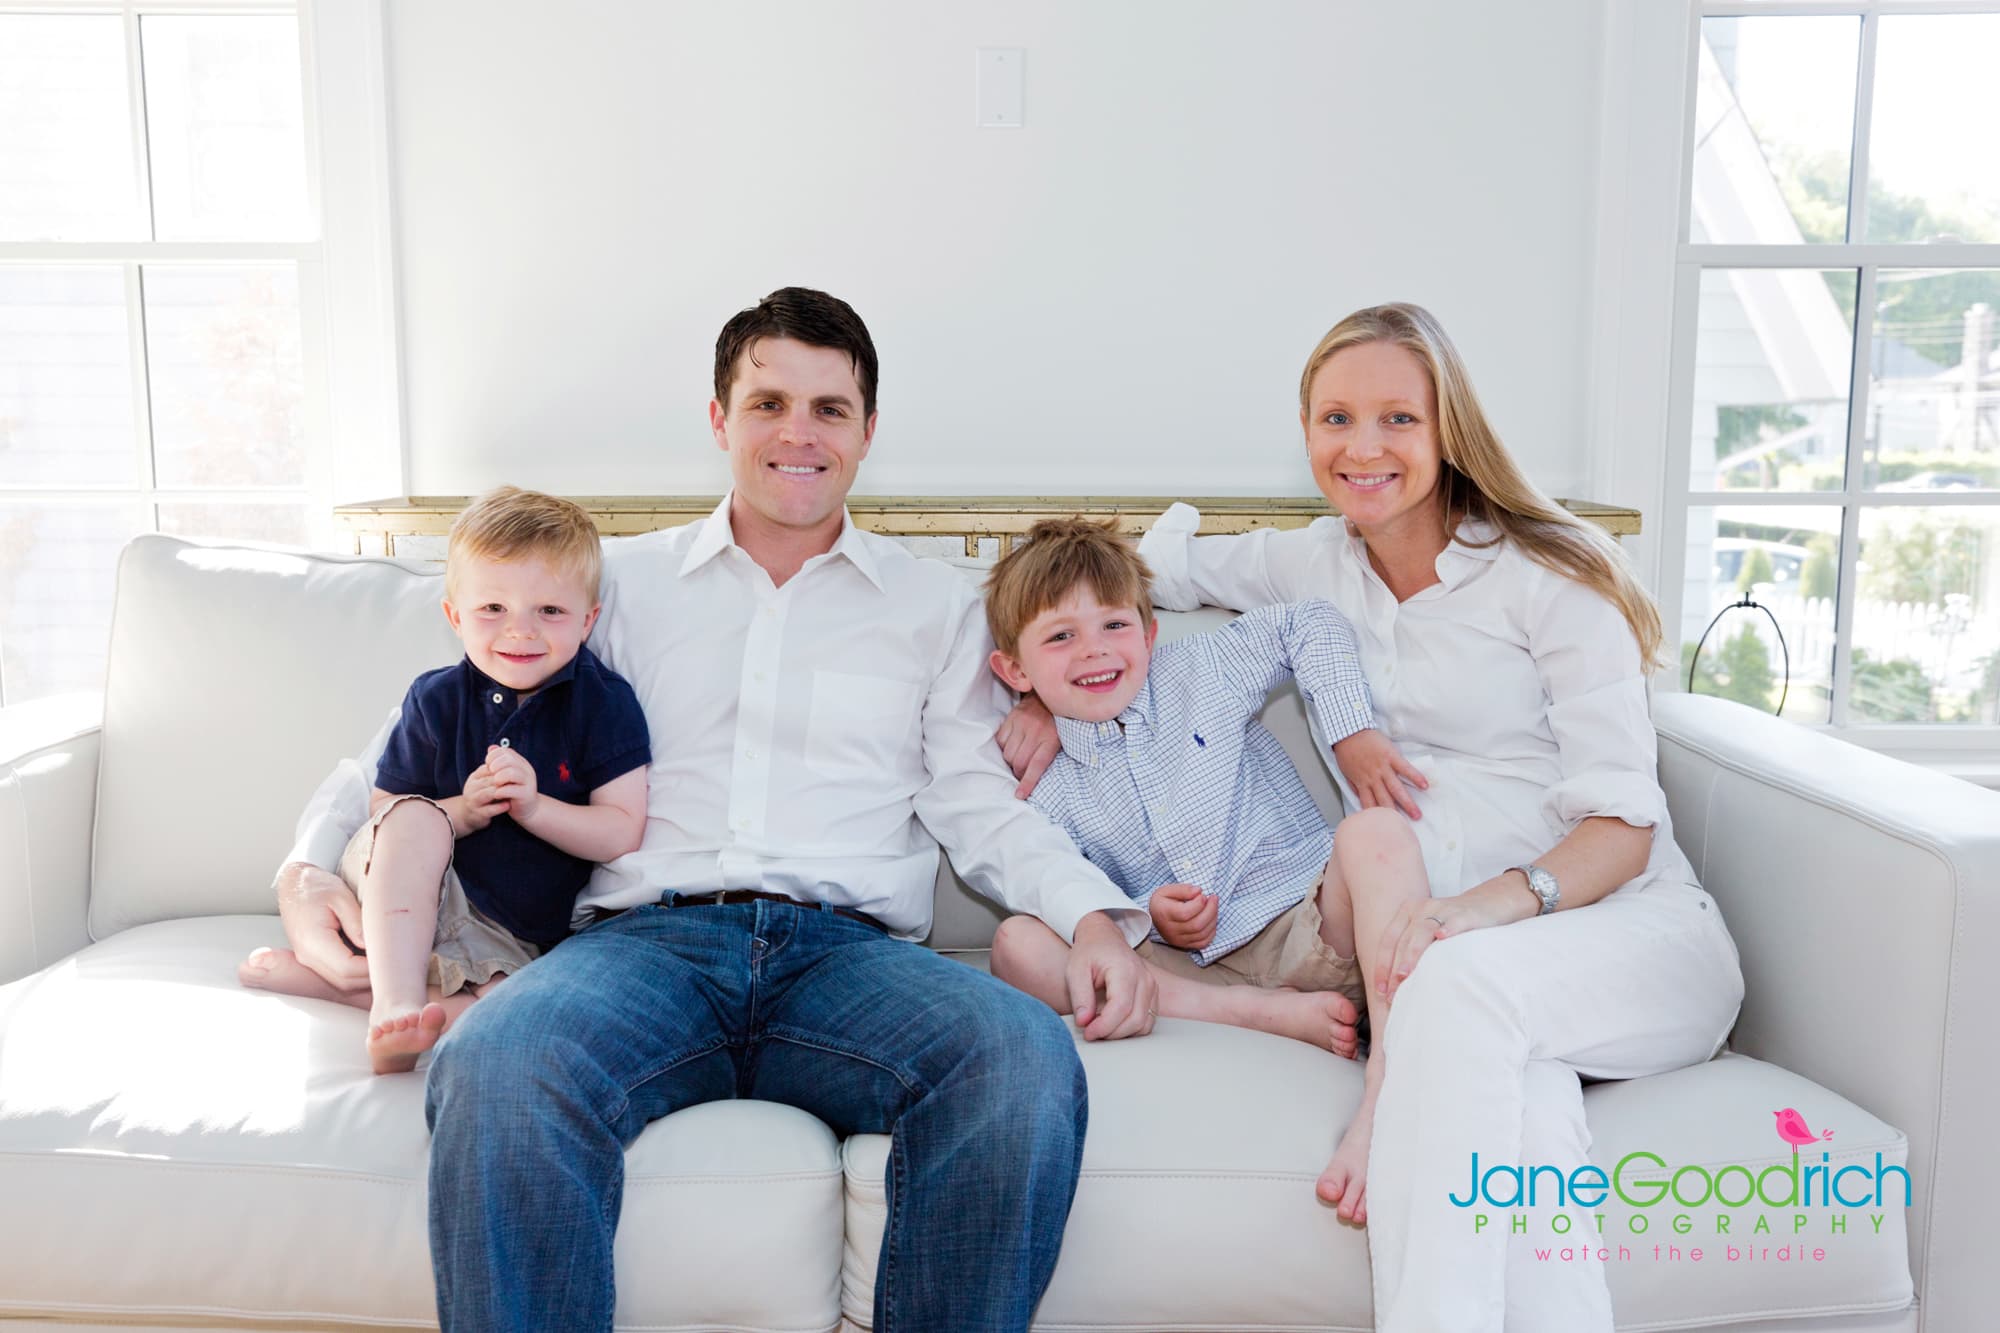 Choosing a fantastic family photographer in Larchmont NY 10538